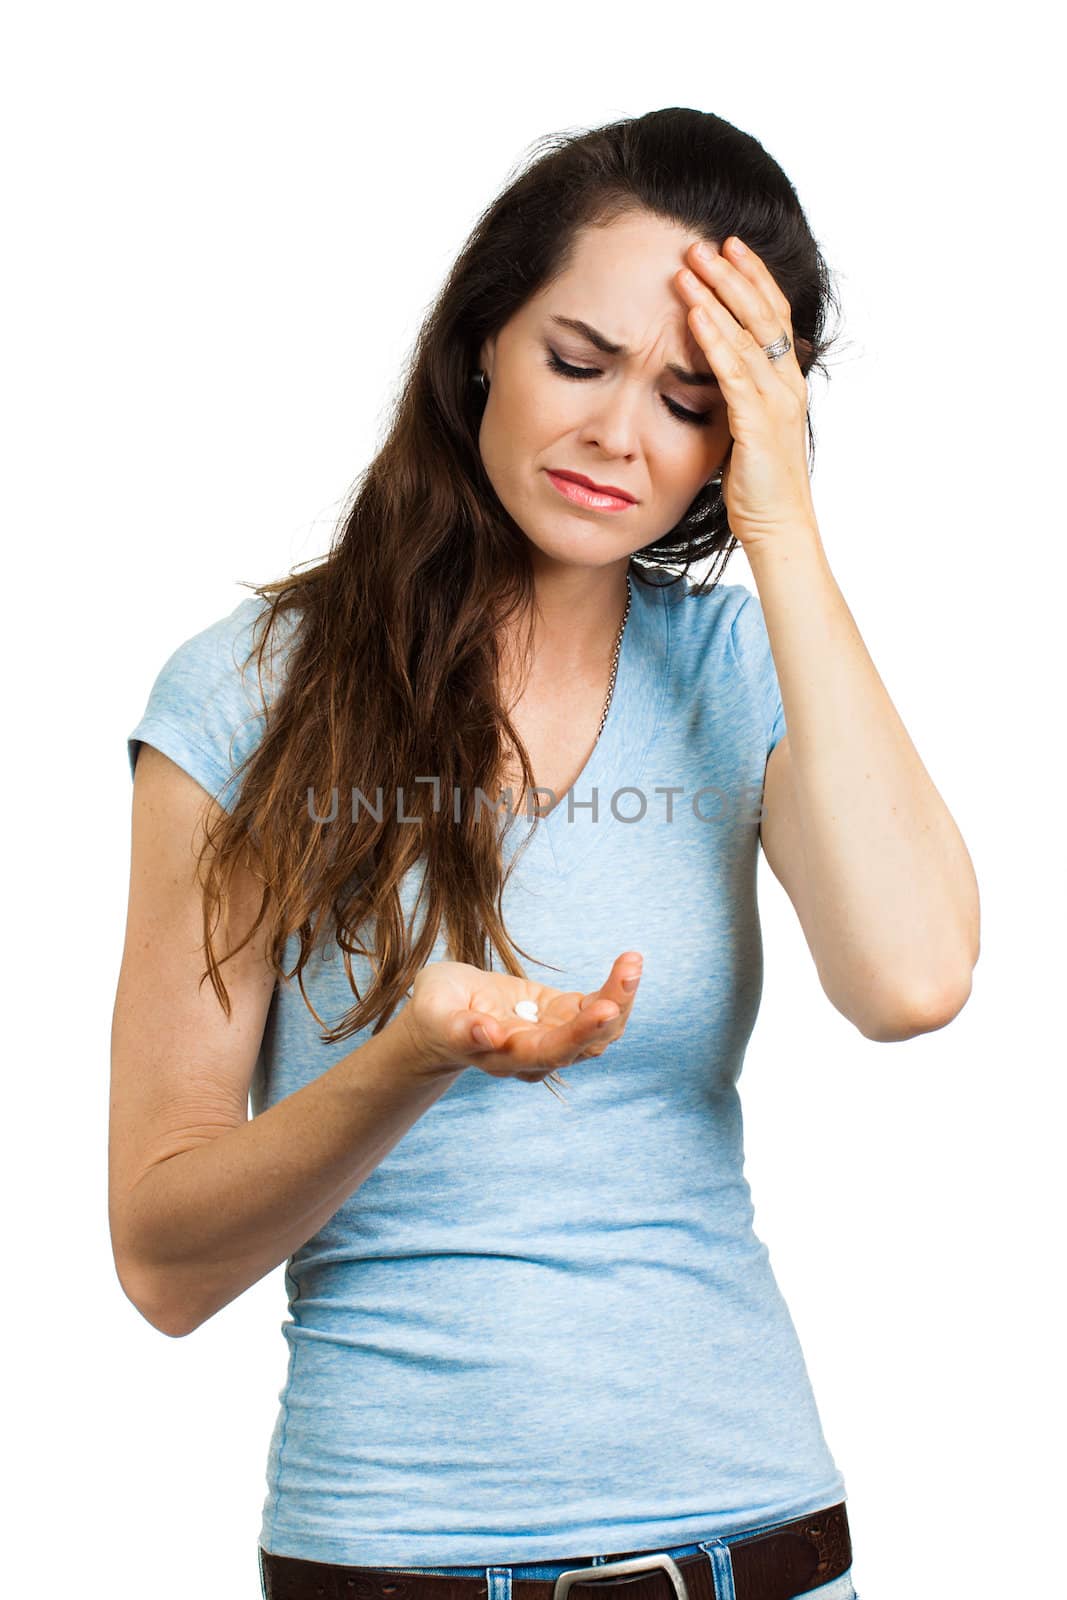 A woman suffering from headache or migraine holding a painkiller pill. Isolated on white.